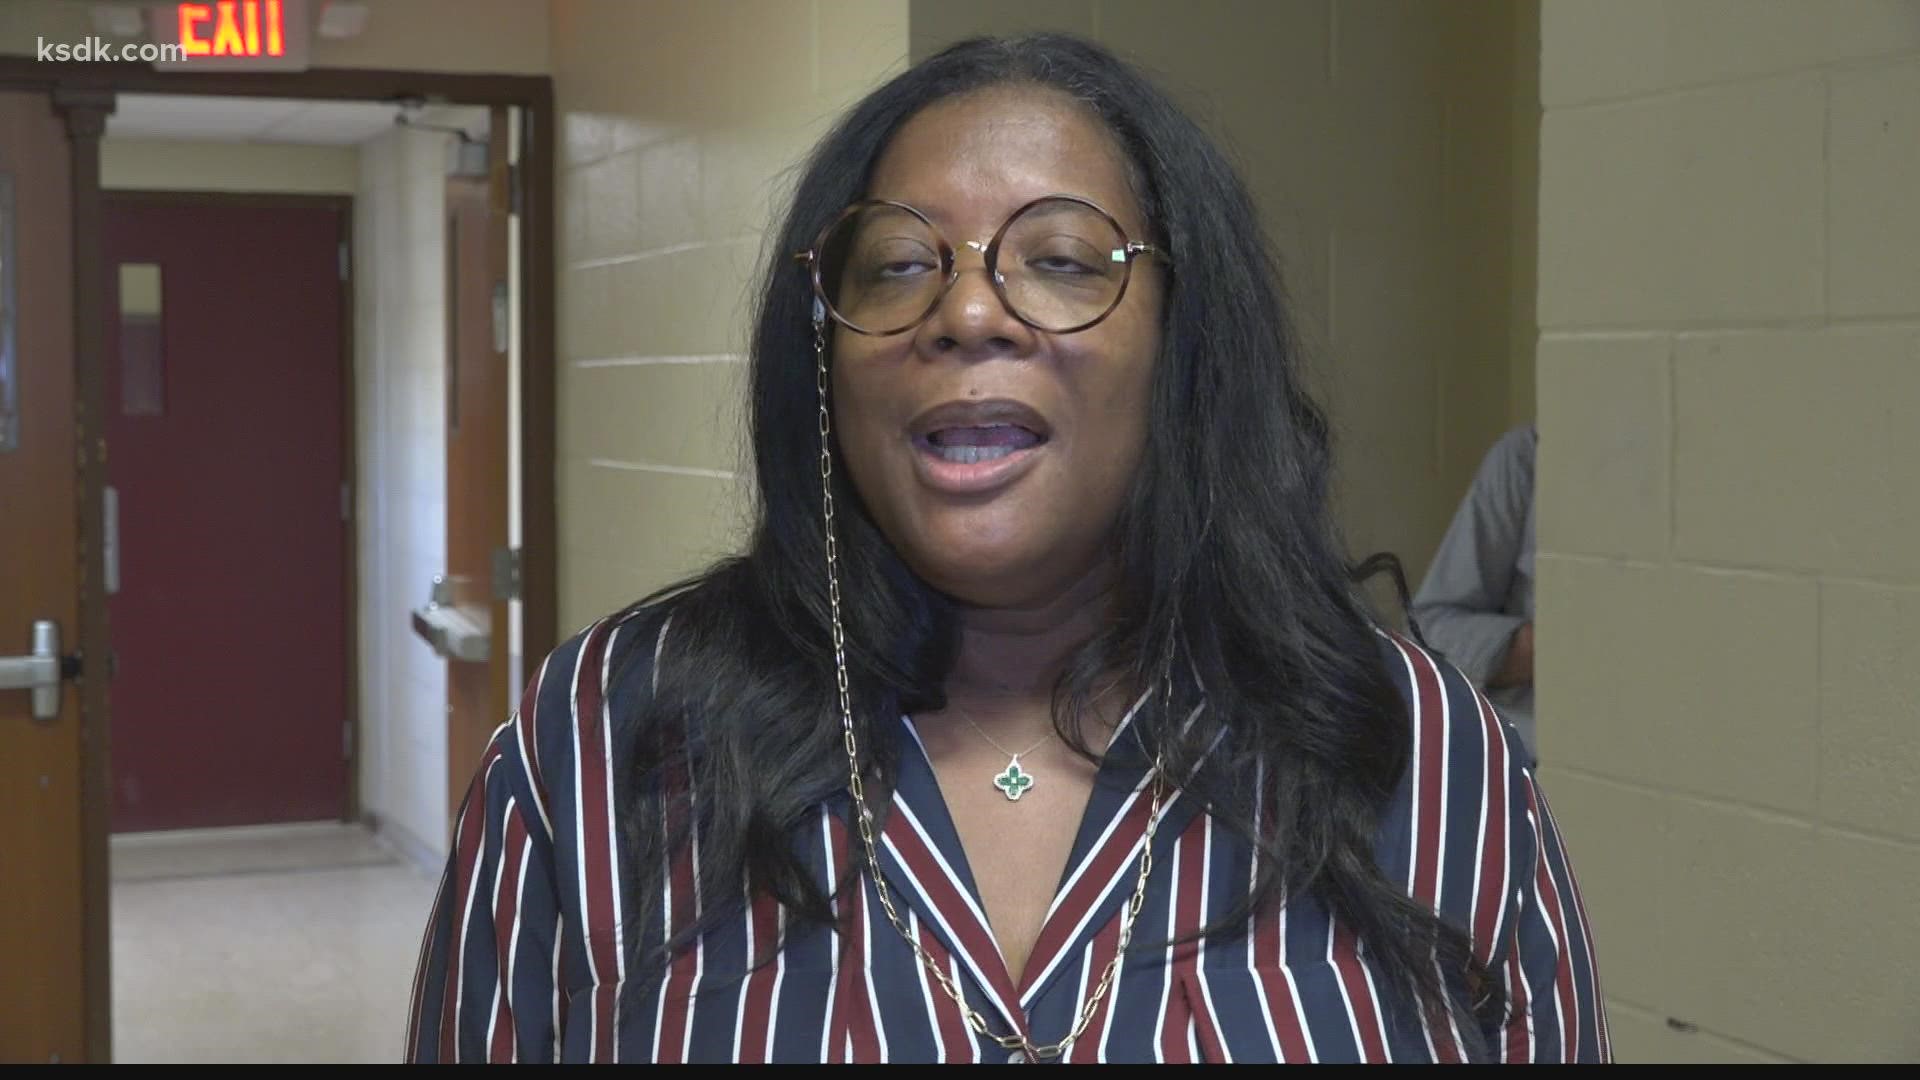 School leaders are looking to build specialized arts programs to increase enrollment and brought in Leah Daniels Butler to help students.